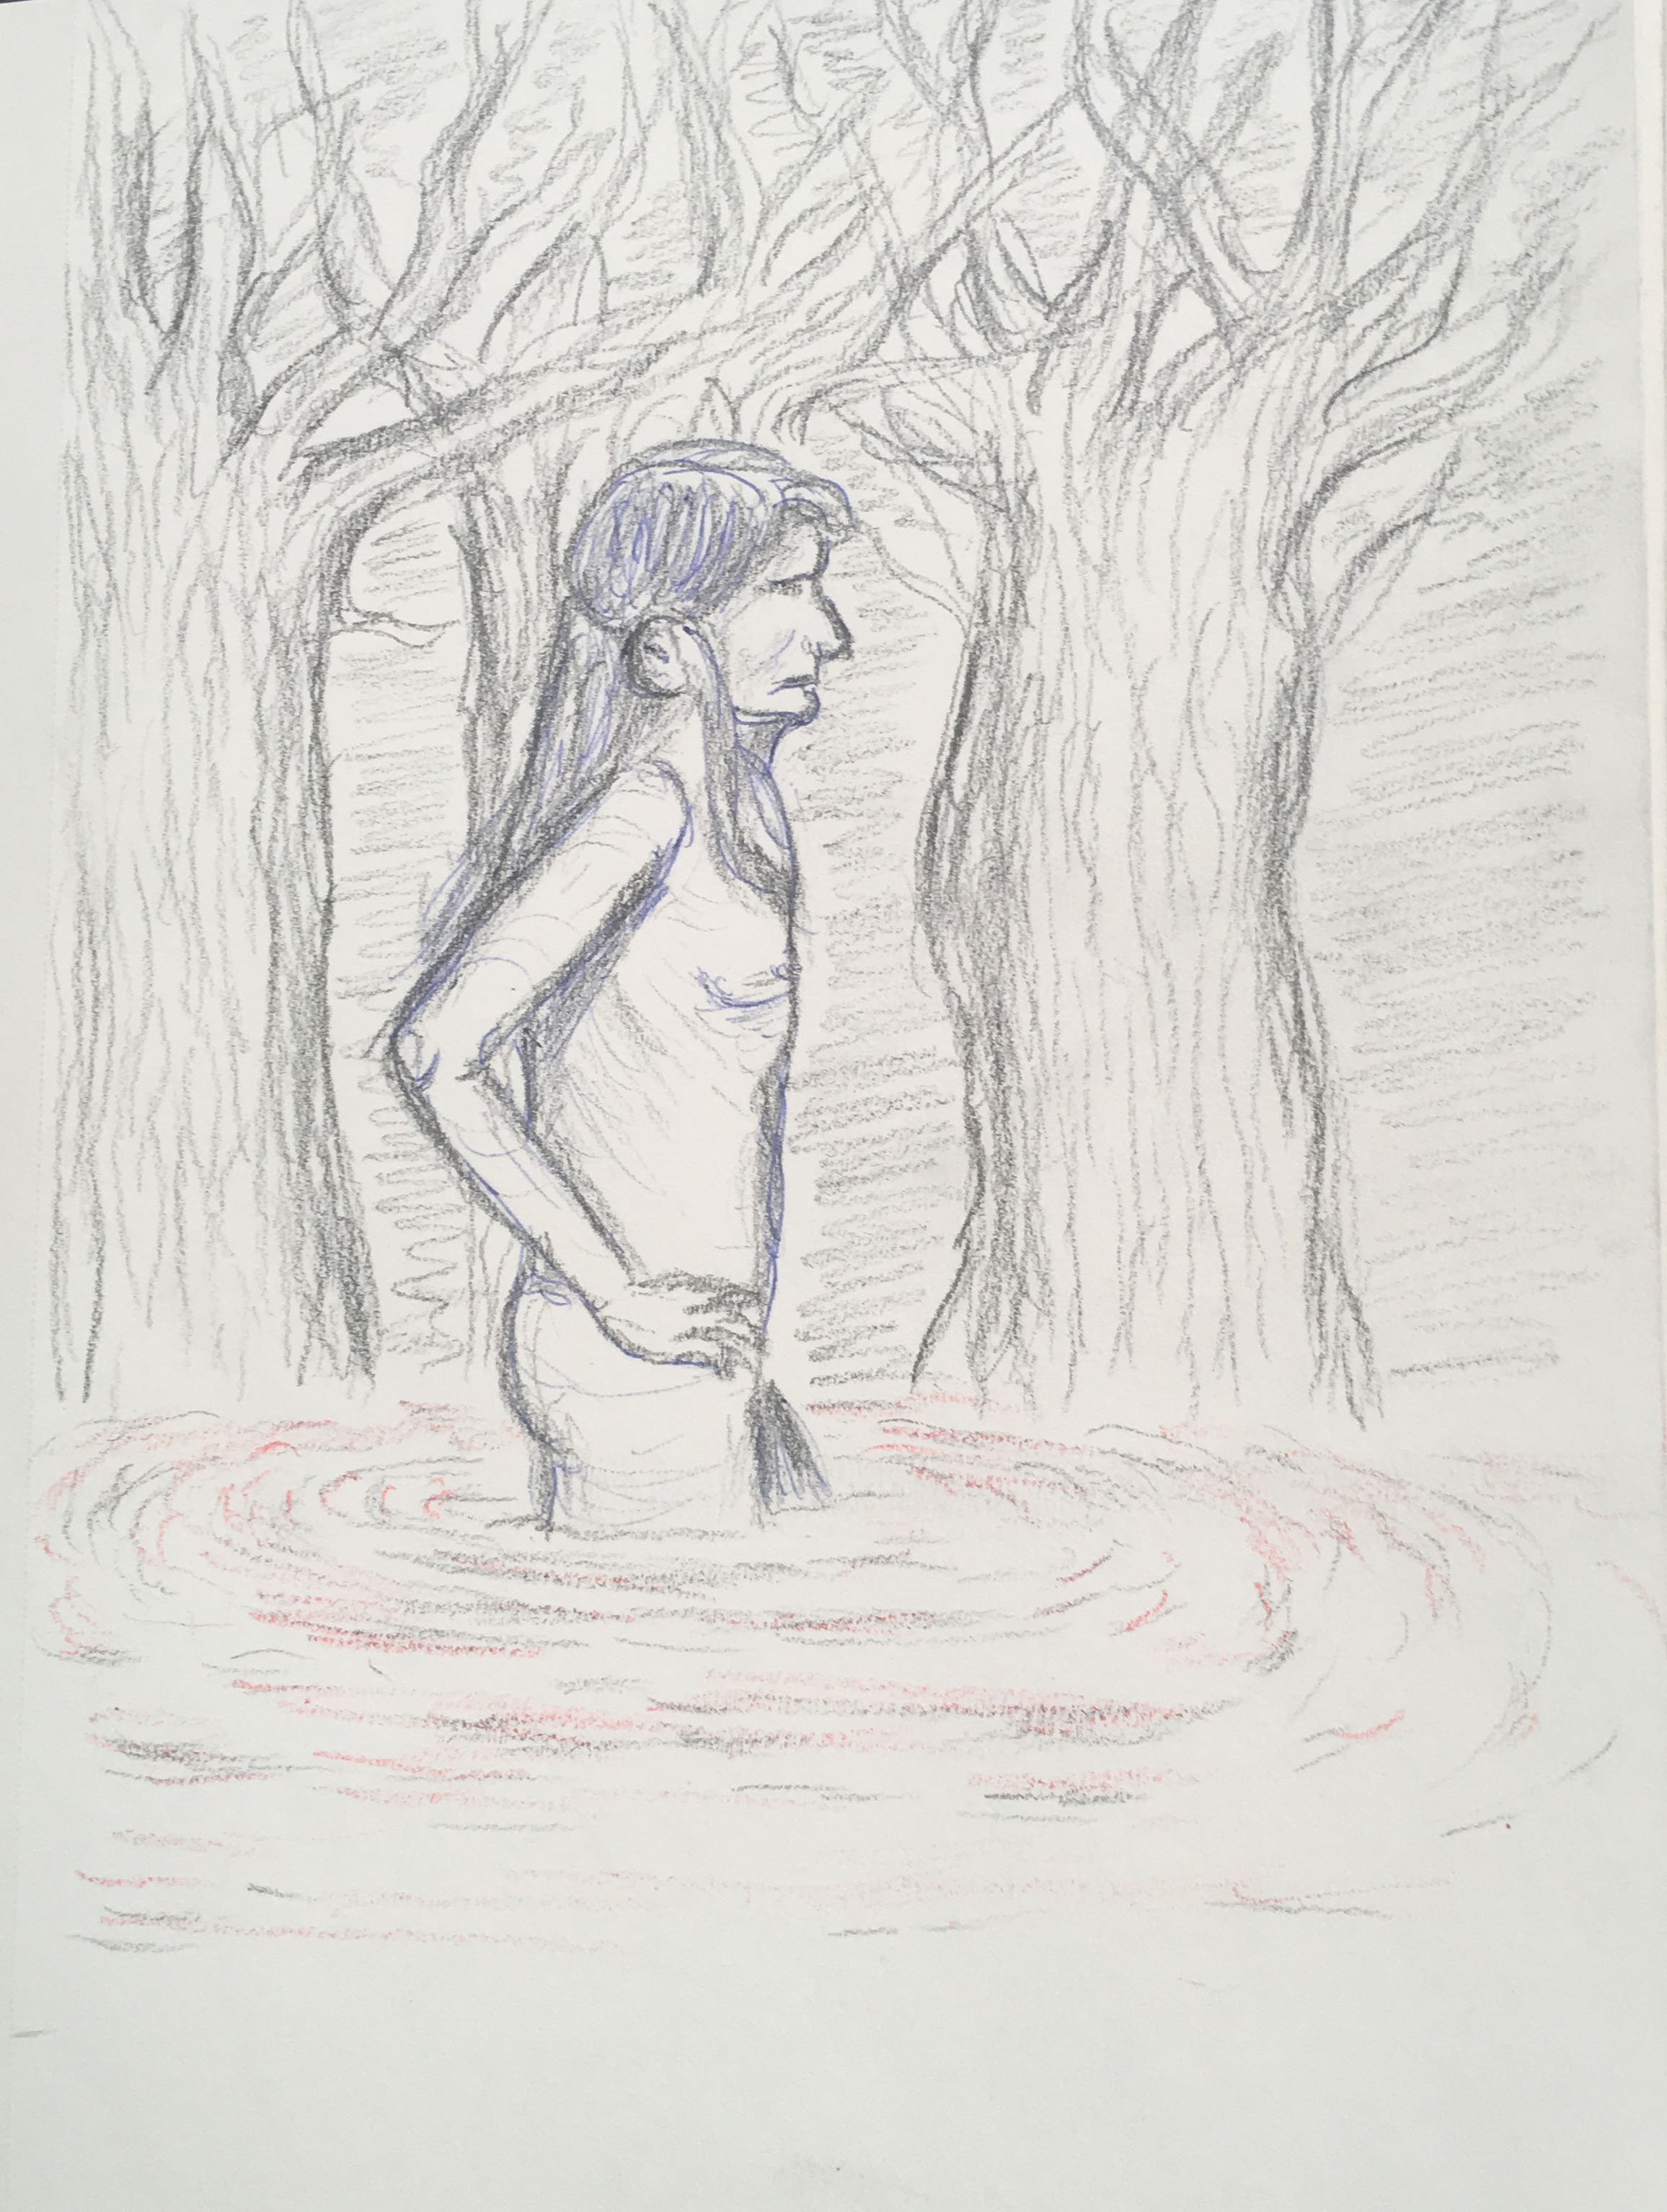 Greenwich High School student's drawing inspired by Steven Shearer's exhibition at The Brant Foundation